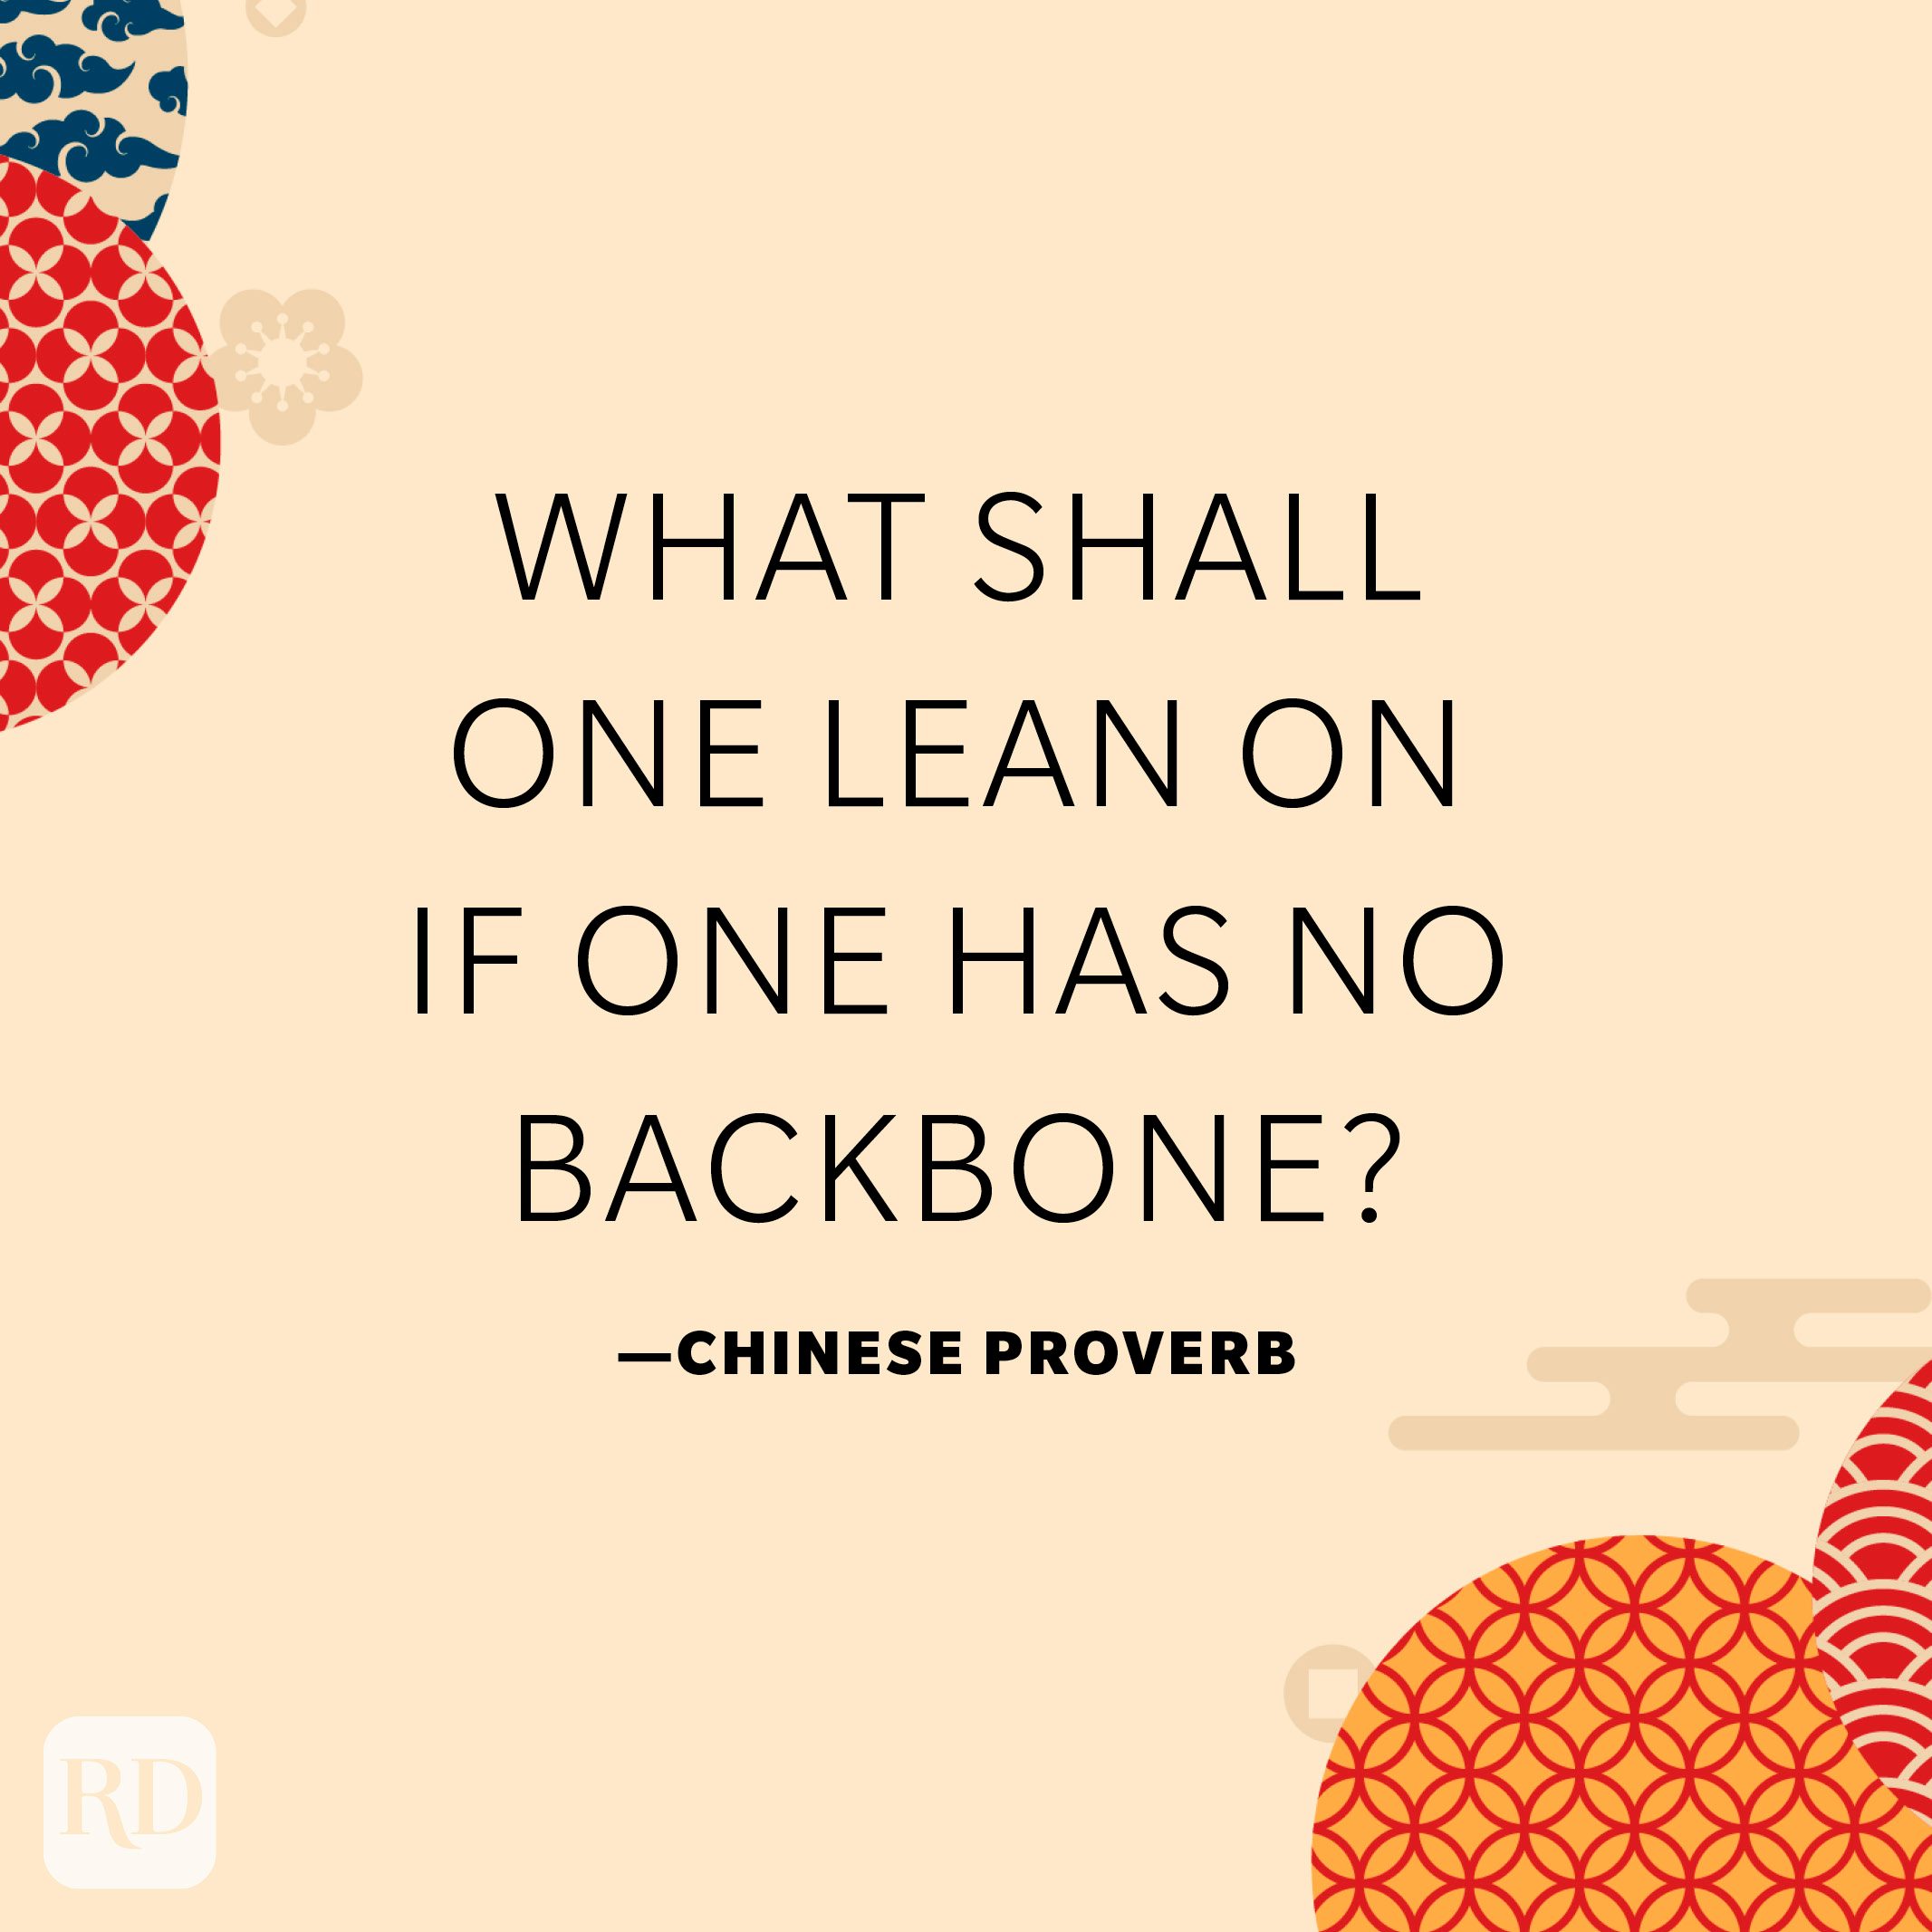 What shall one lean on if one has no backbone?